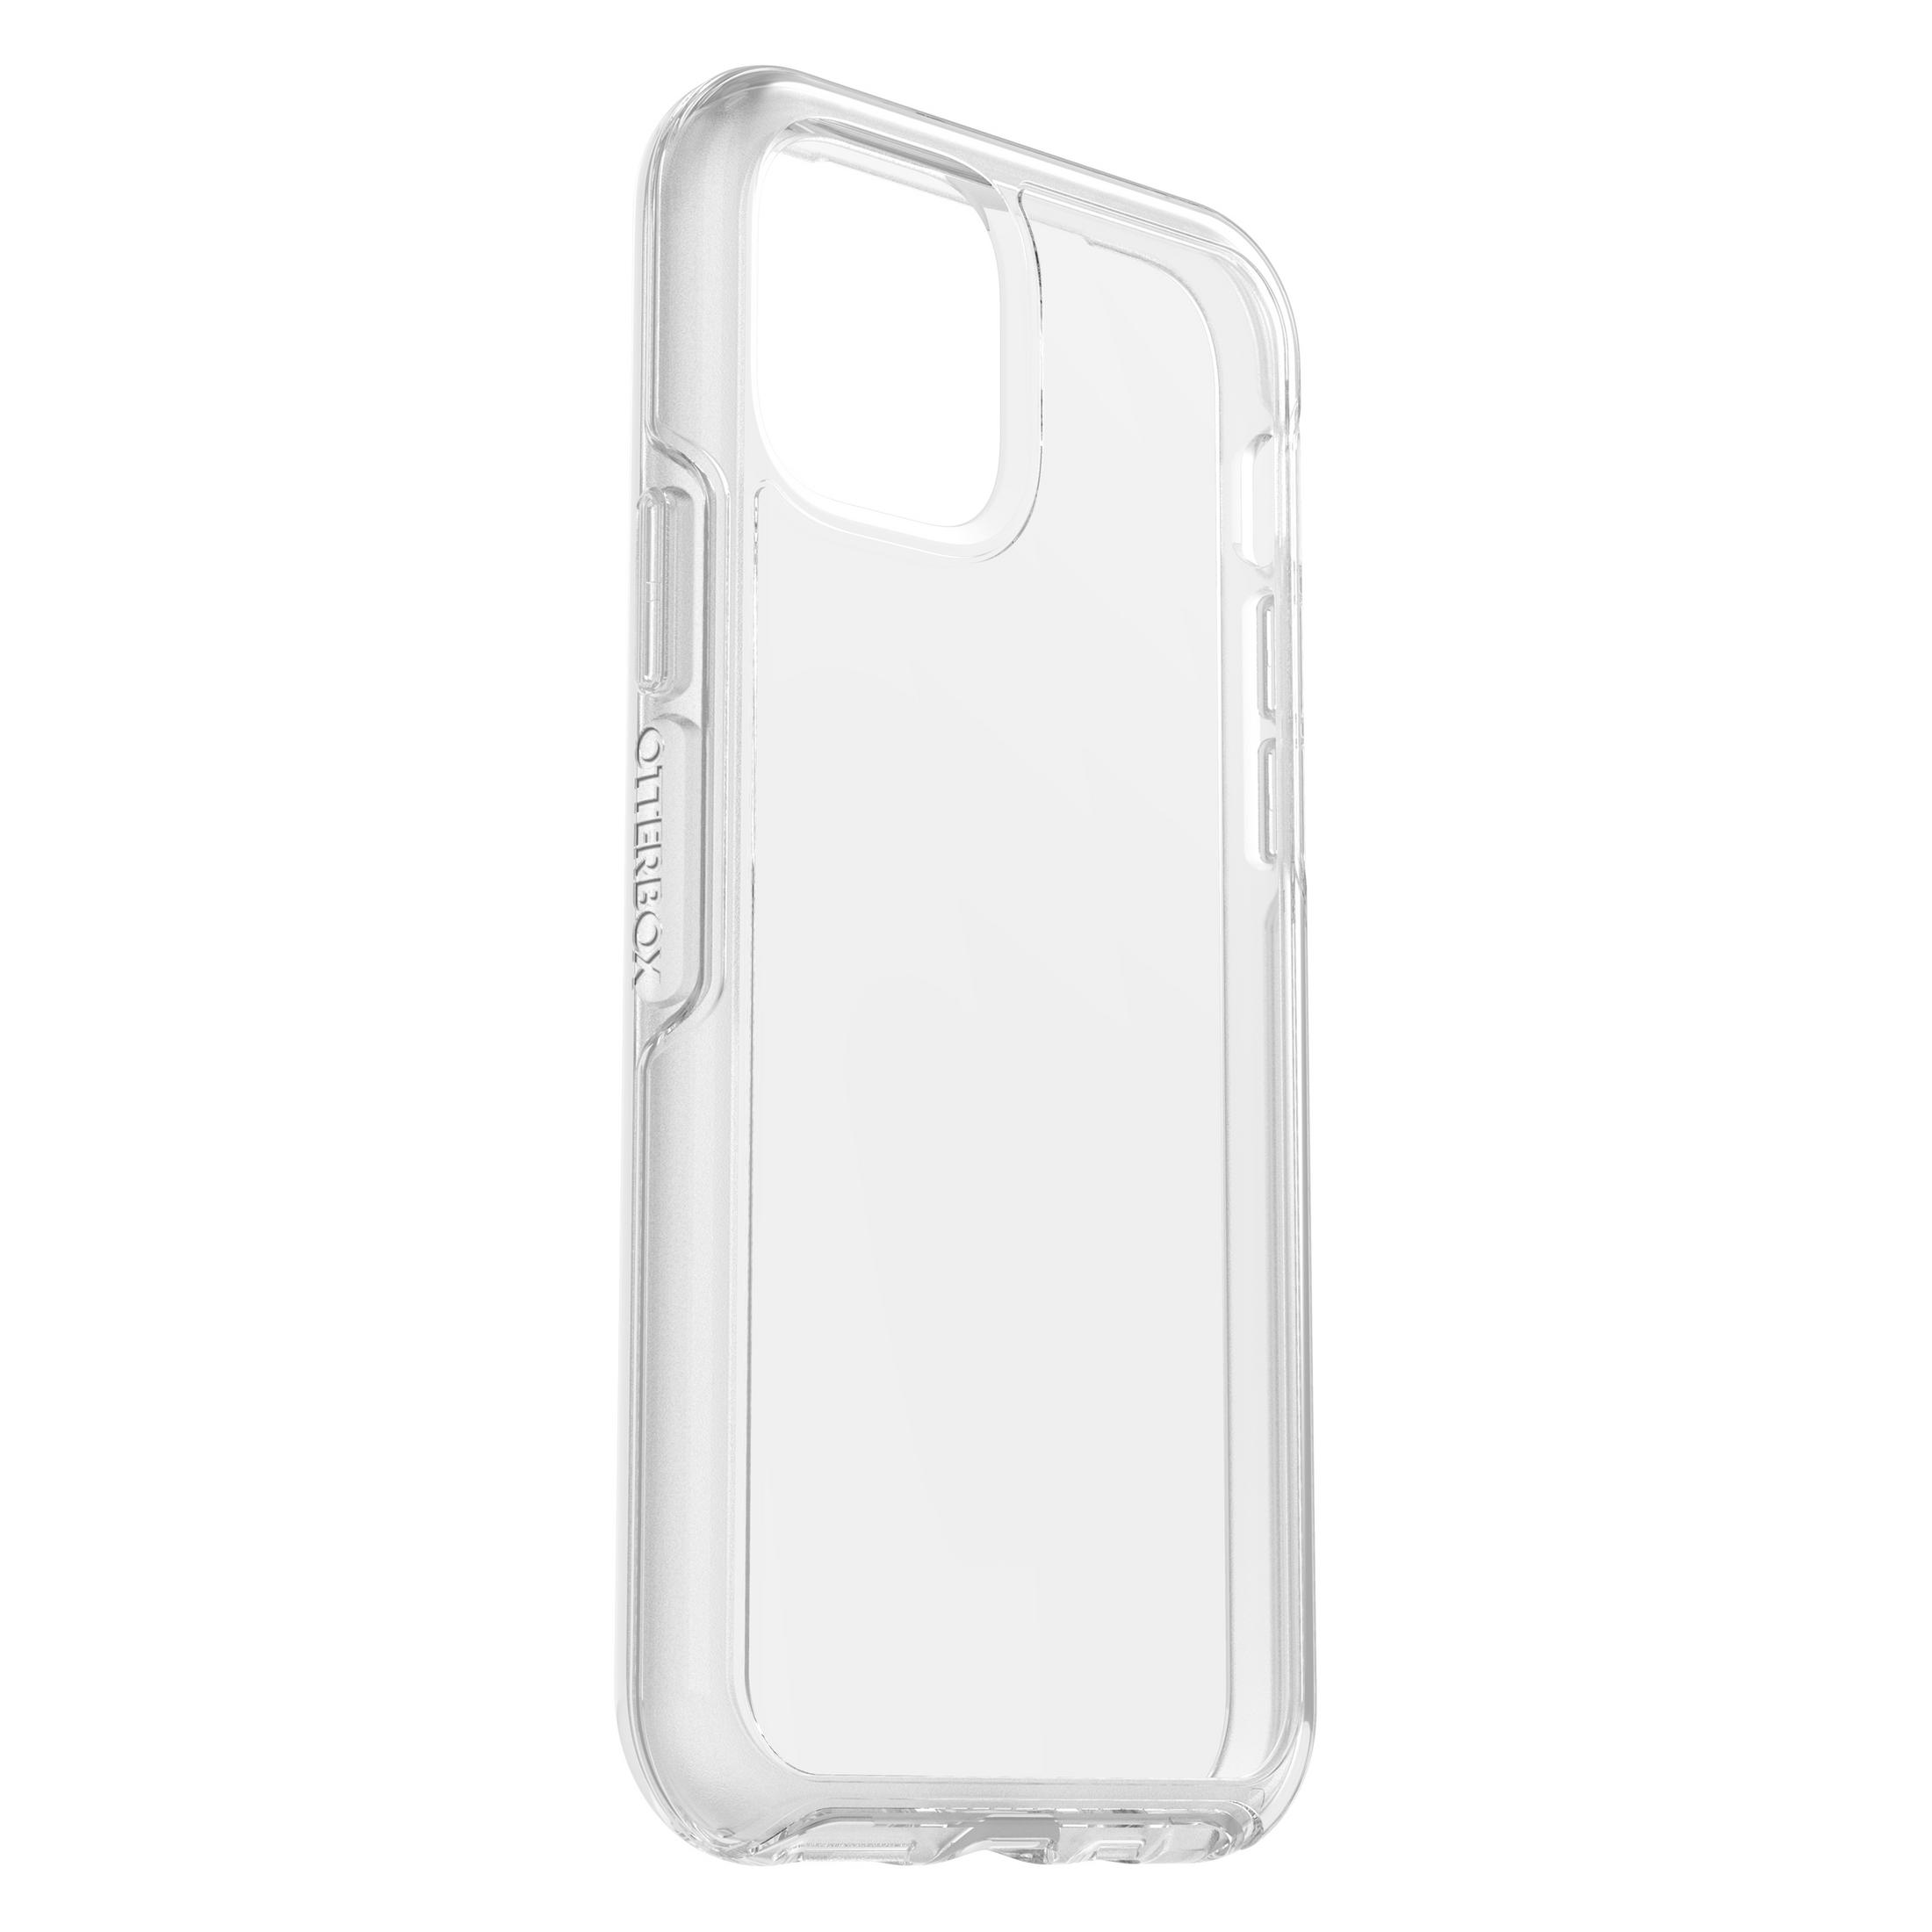 IP SYMMETRY Apple, Transparent Pro, PRO iPhone 77-63034 CLEAR, 11 Backcover, OTTERBOX 11